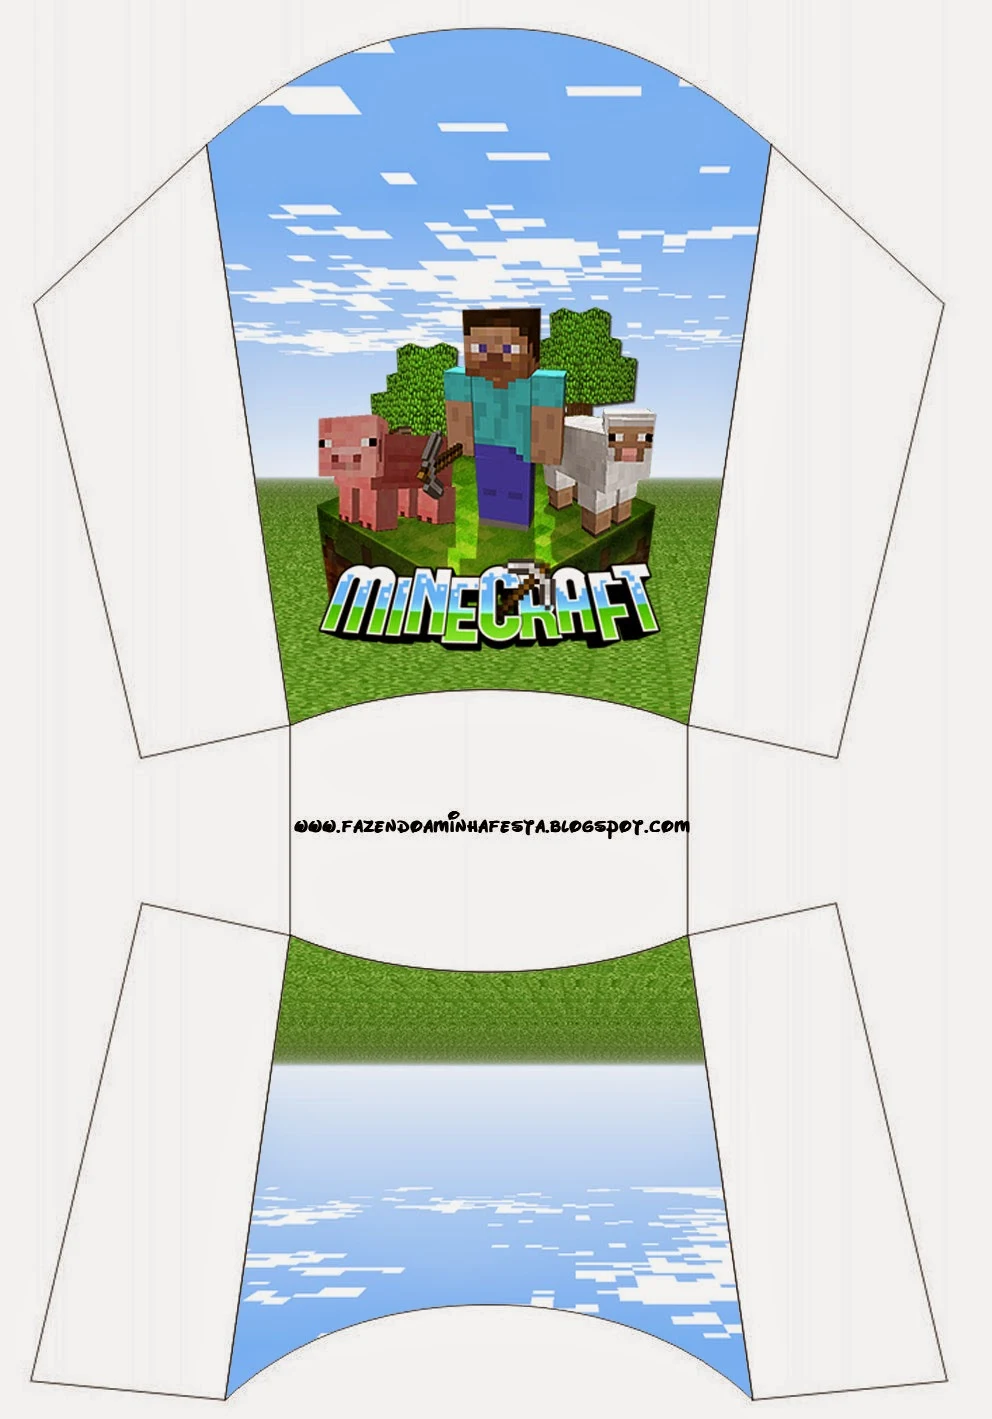 Minecraft Free Printable Boxes. - Oh My Fiesta! in english